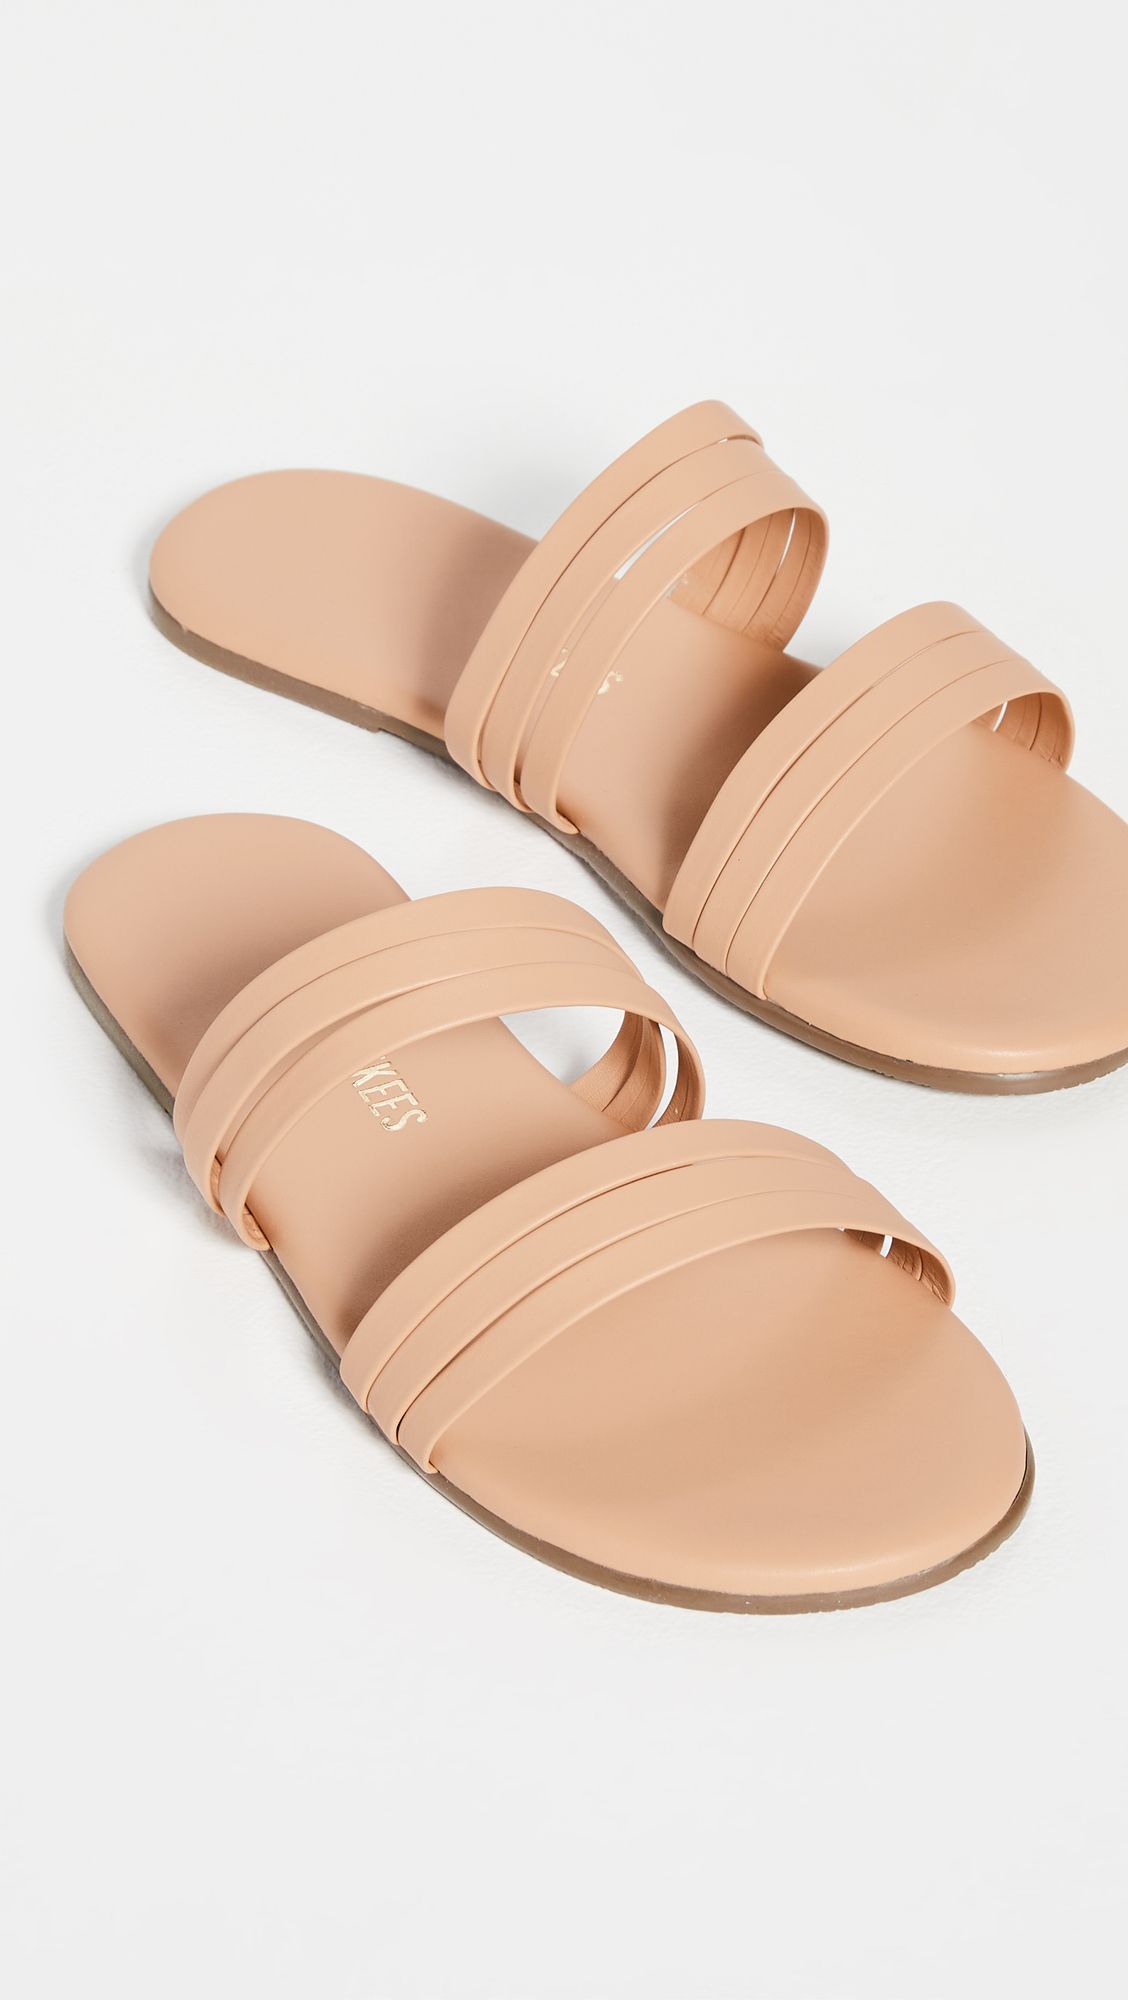 The 30 Best Travel Sandals for Women in 2021 | Who What Wear